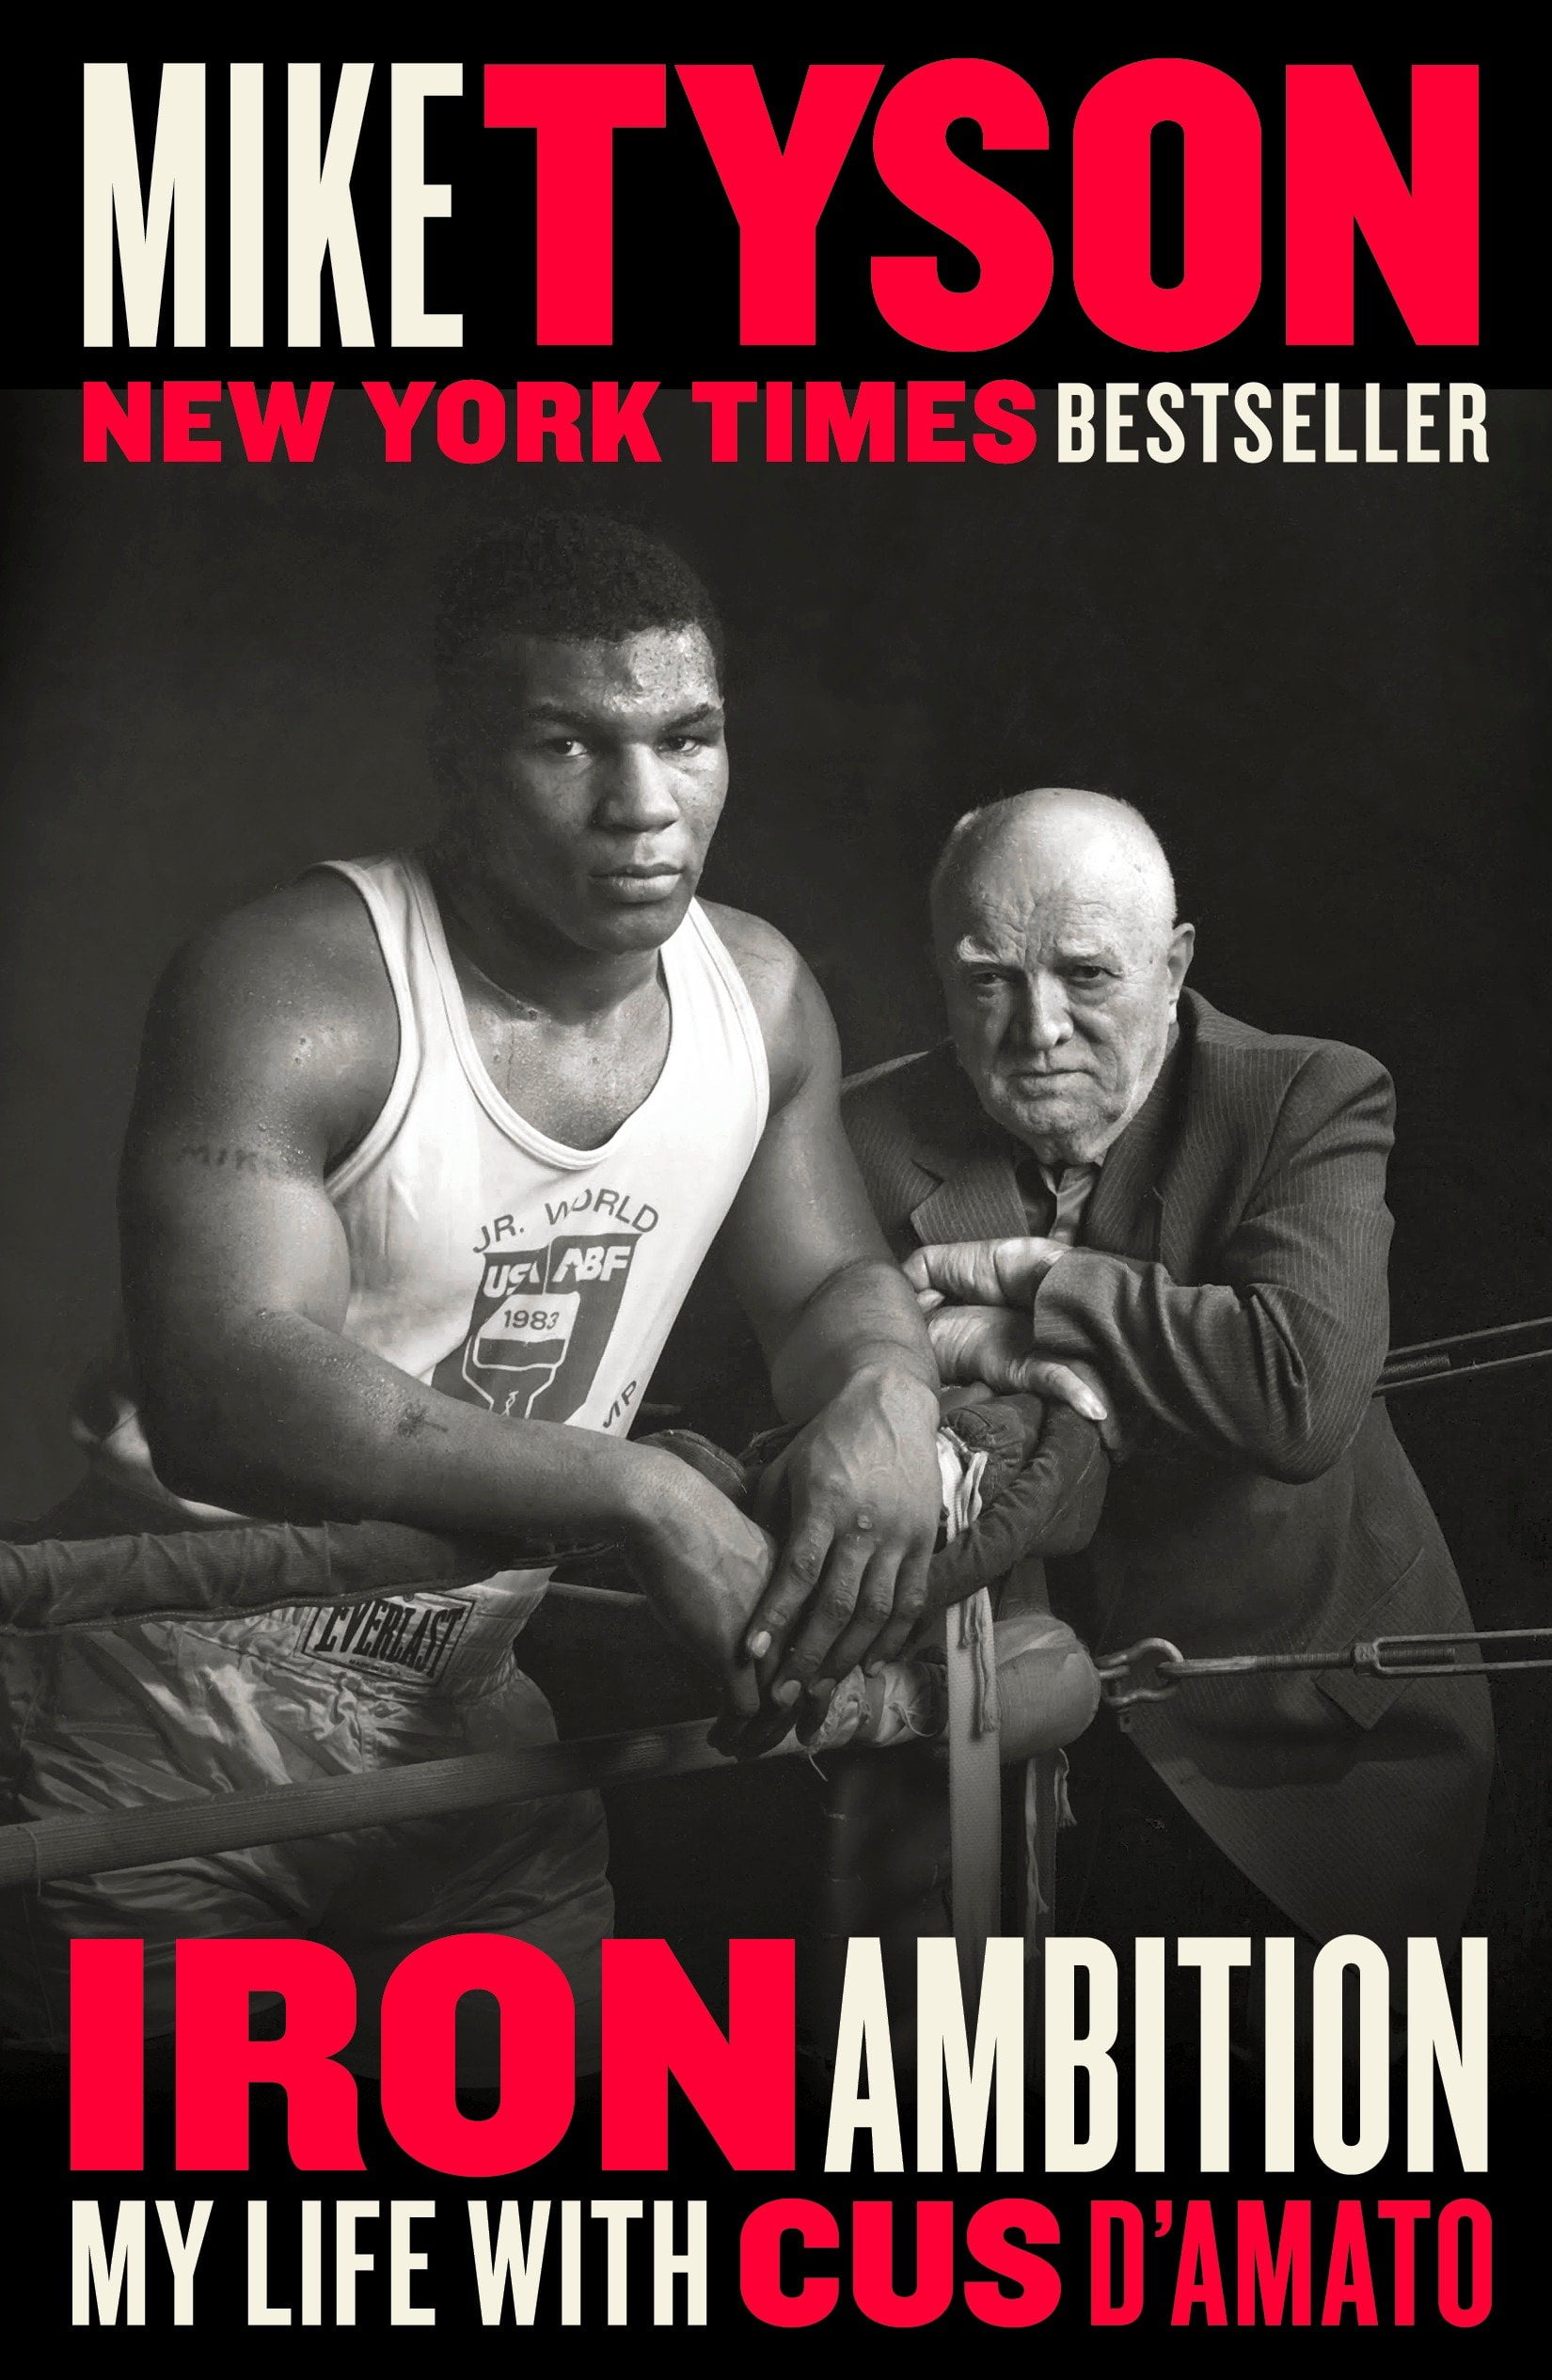 mike tyson iron ambition my life with cus d amato